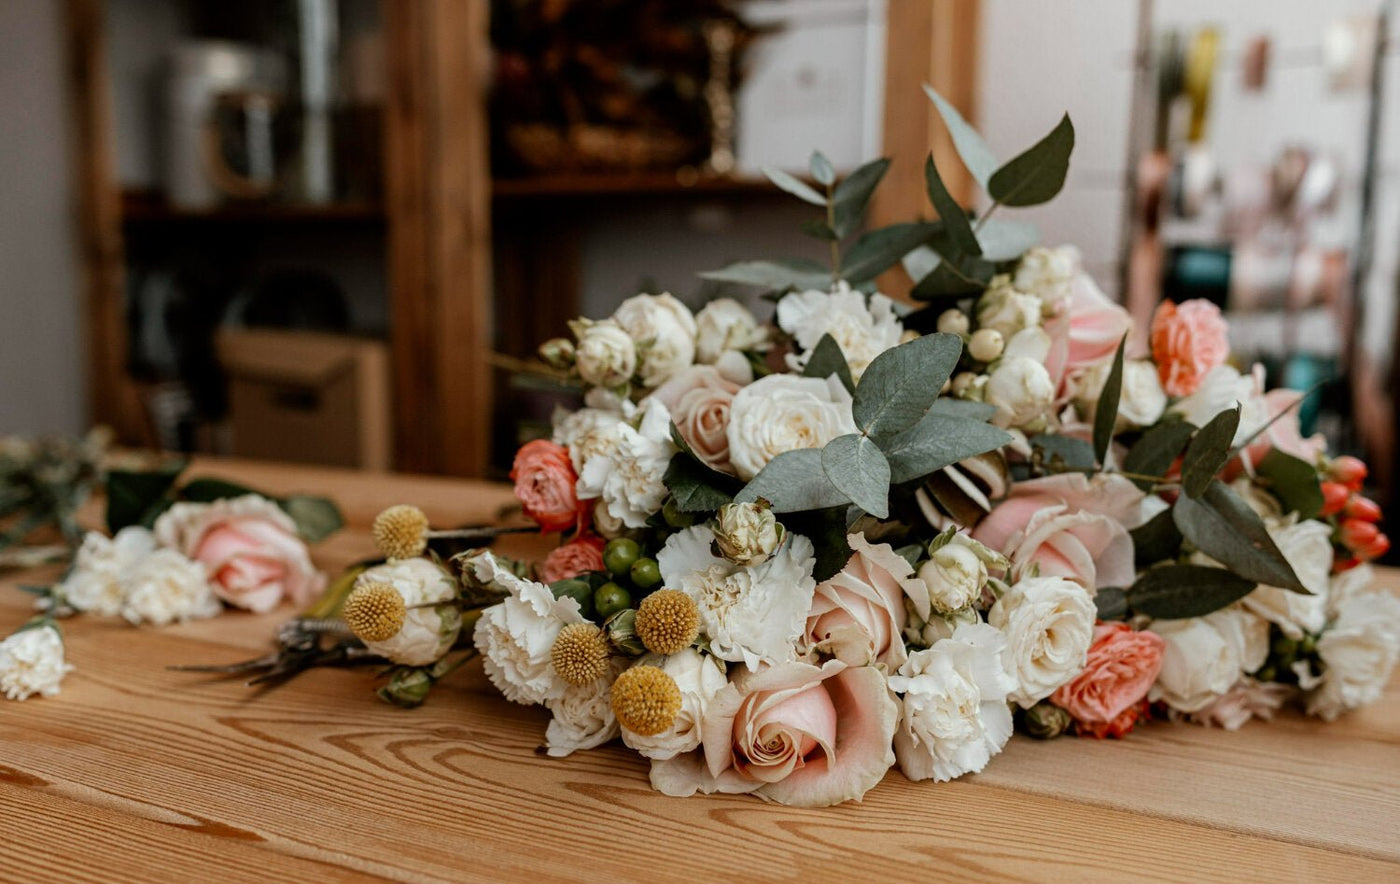 Elevate Your Floral Experience with The Green Room Flower Co. - The Green Room Flower Company